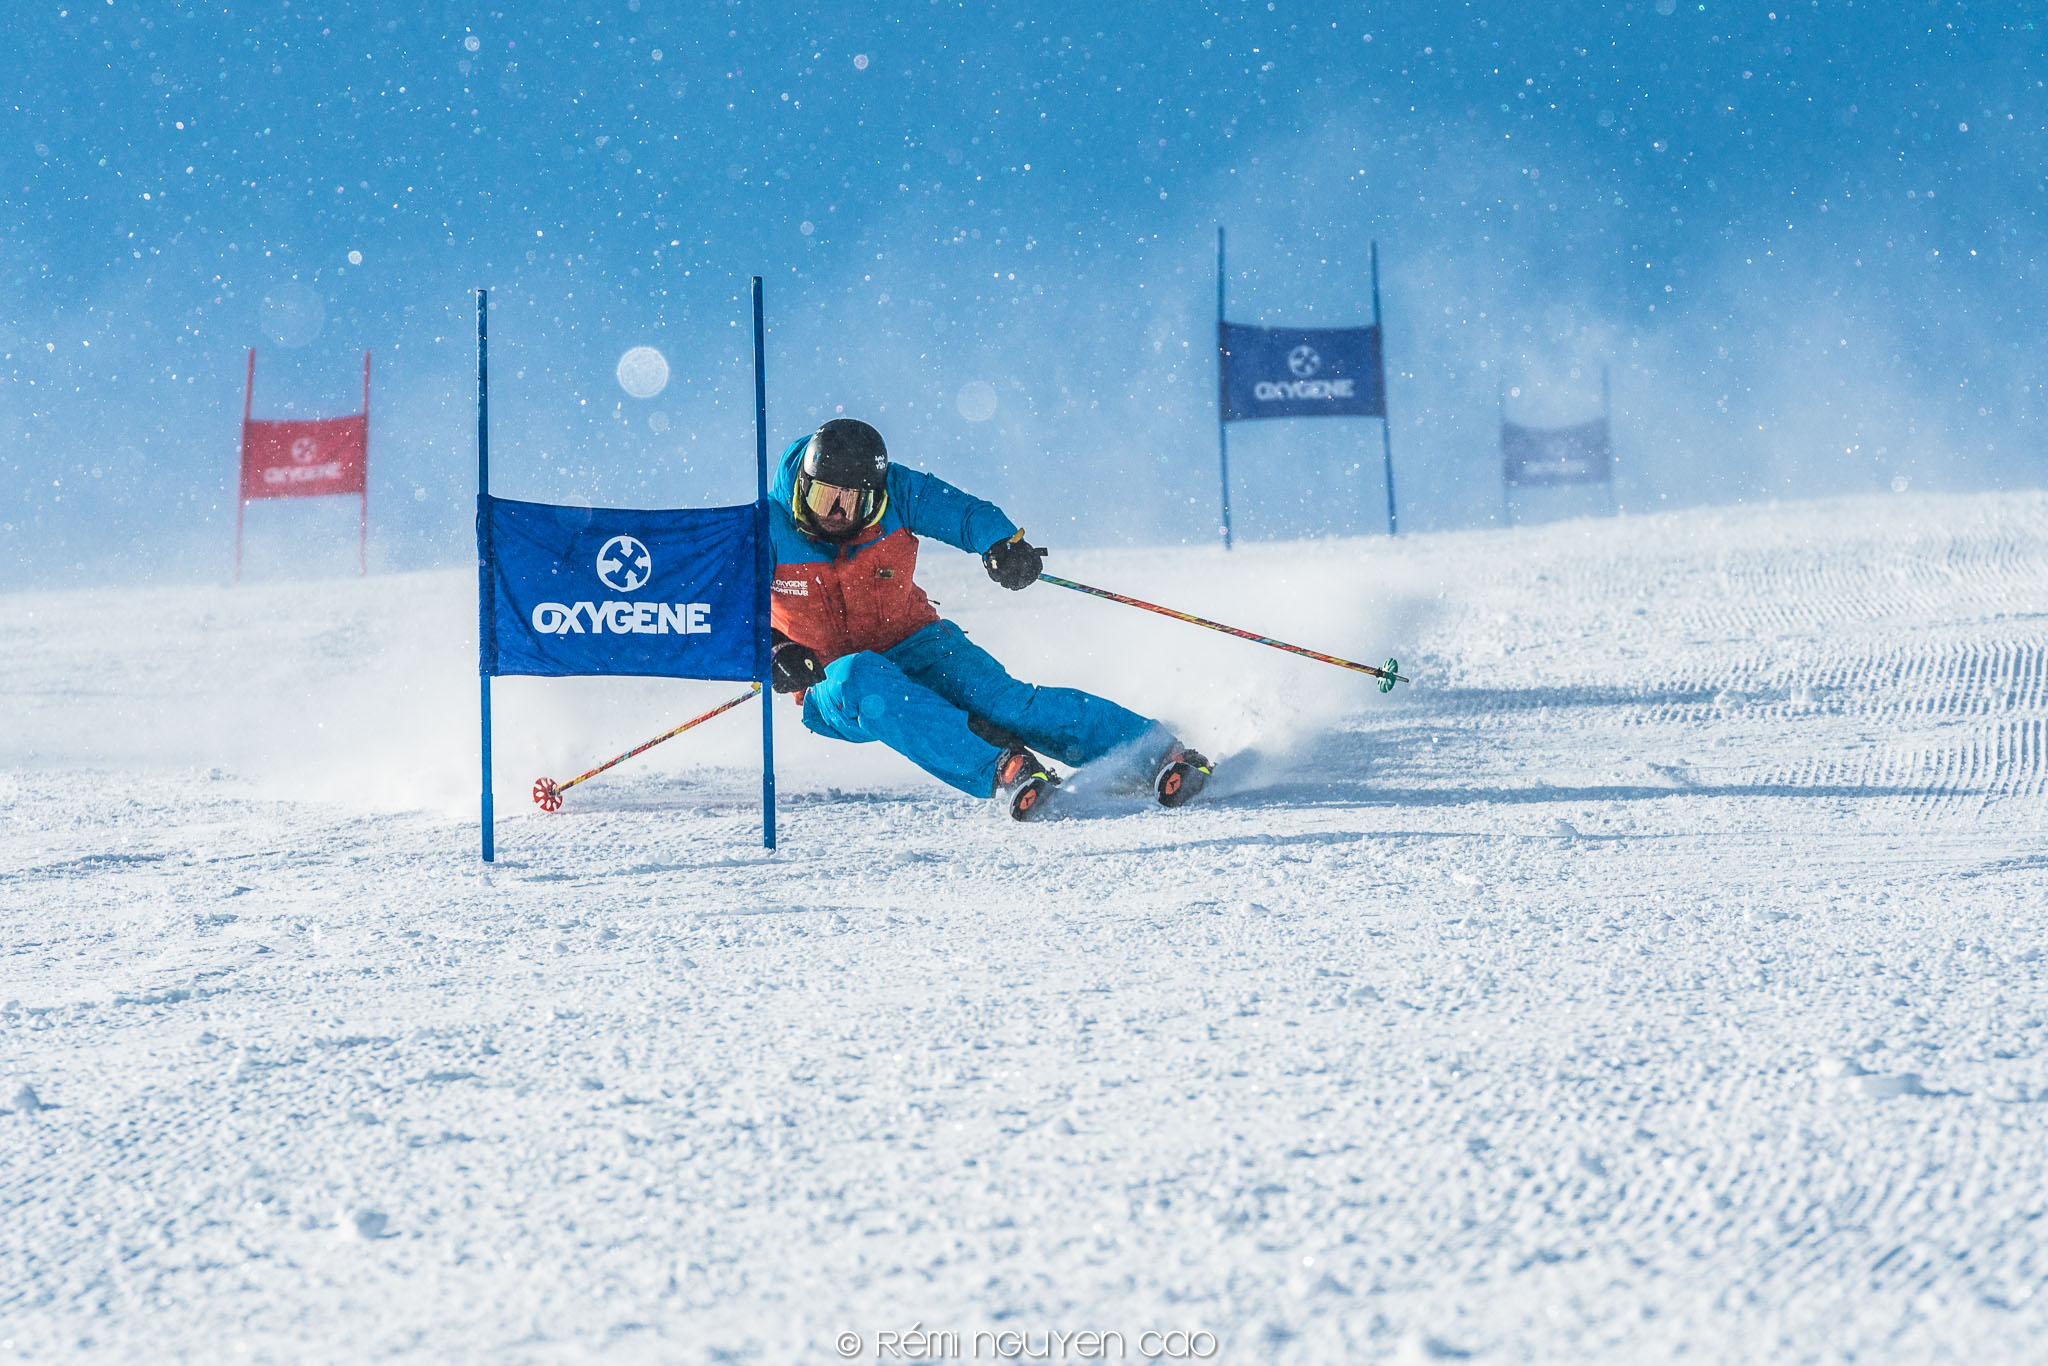 Ski instructor course with Oxygene ski academy to become fully qualified instructor in France